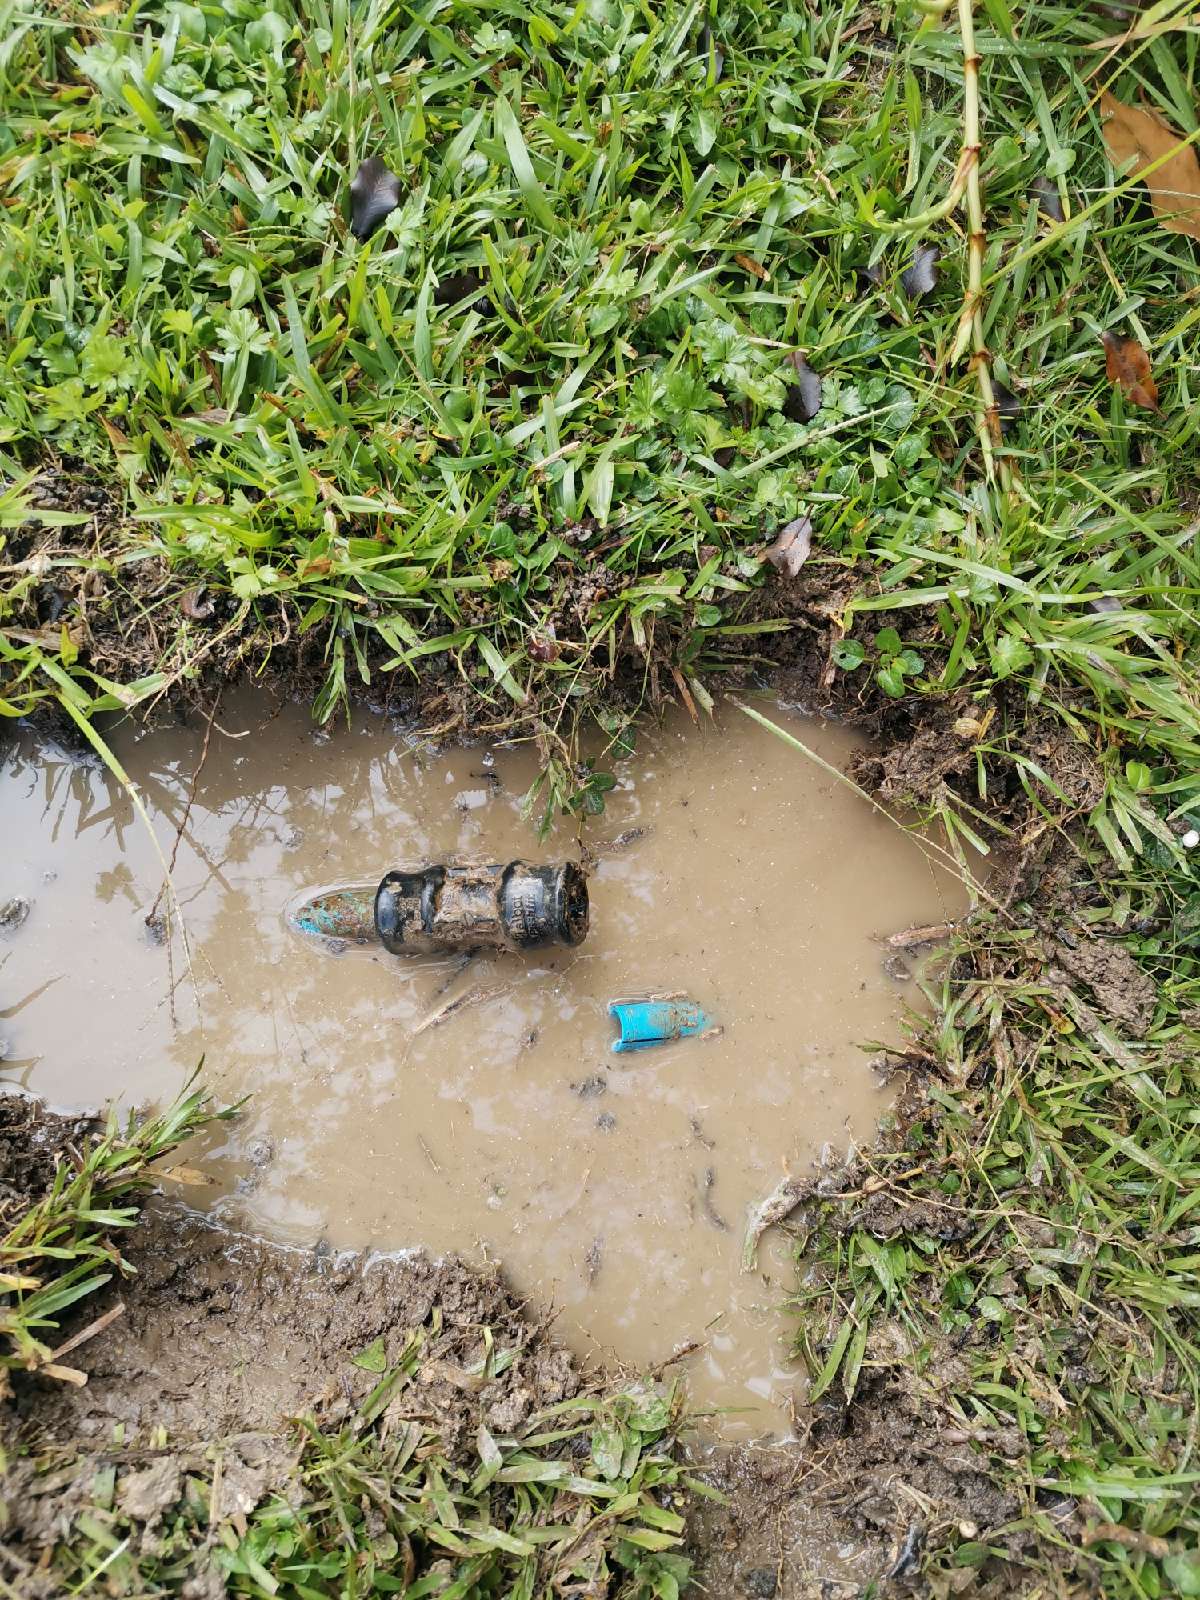 A leak in the water mains can cause thousands of dollars in losses; get in touch to for all kinds of water mains repairs in Auckland